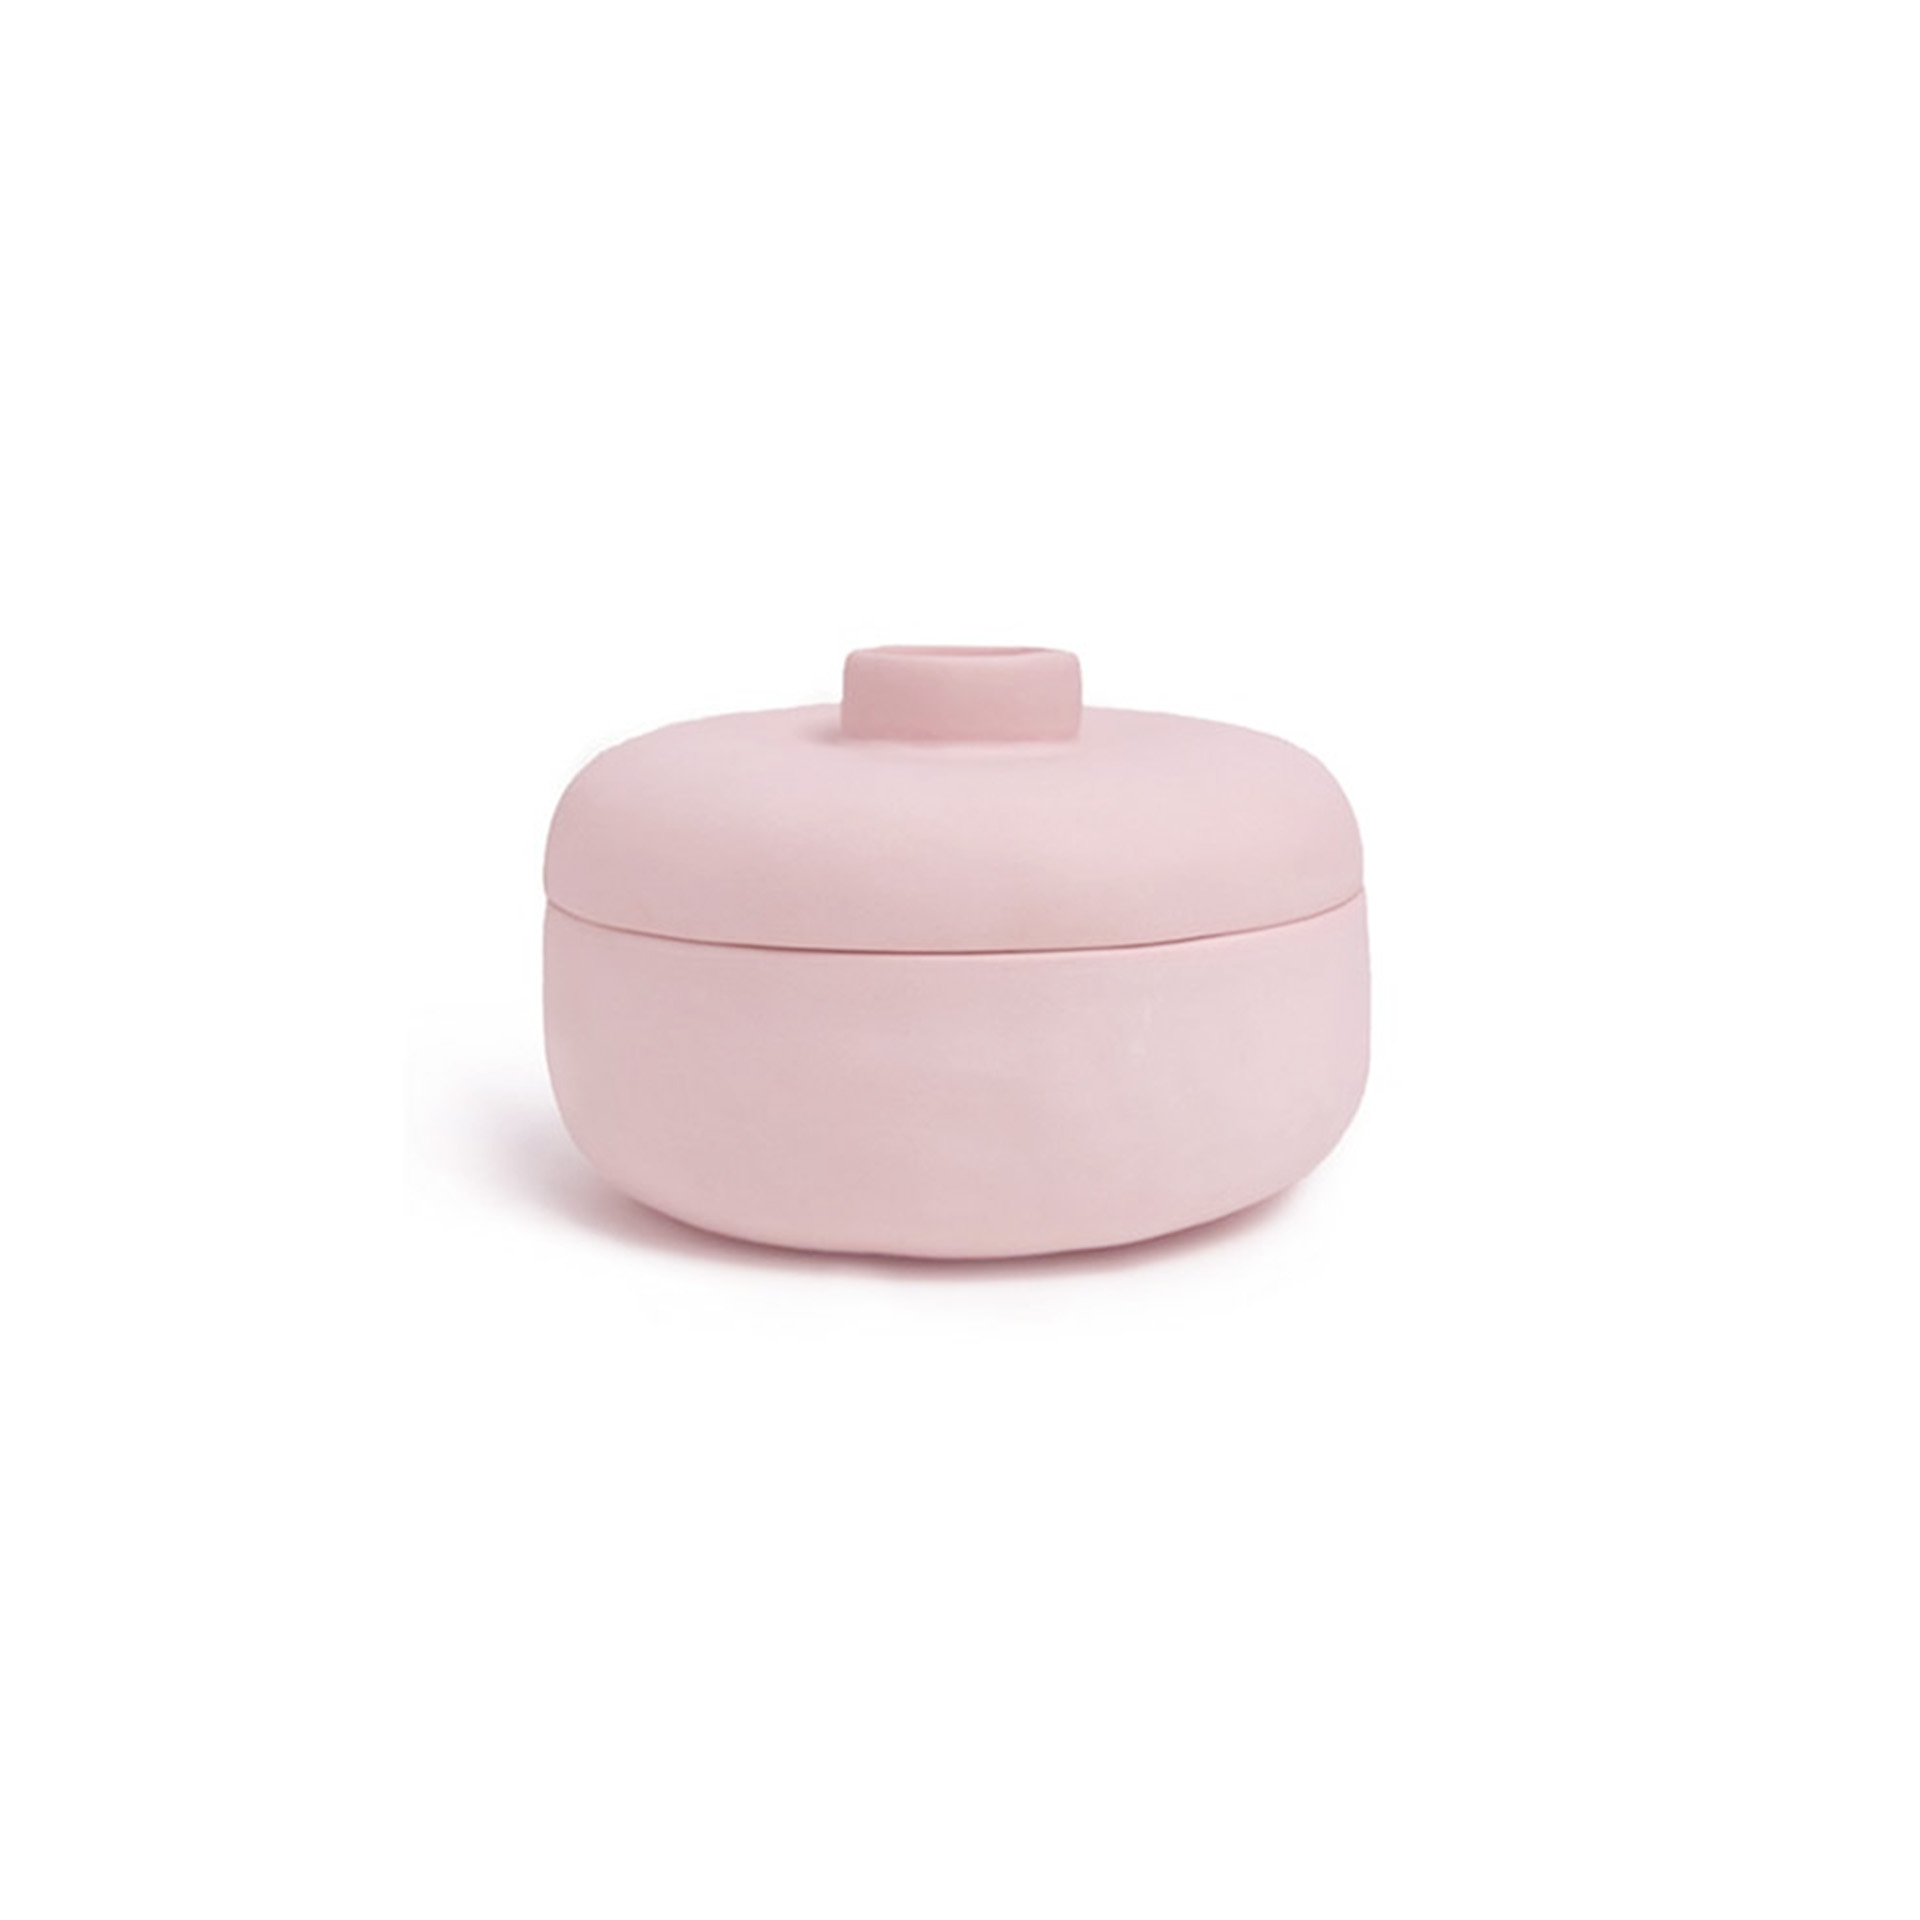 Ricebowl with lid L in: Pink